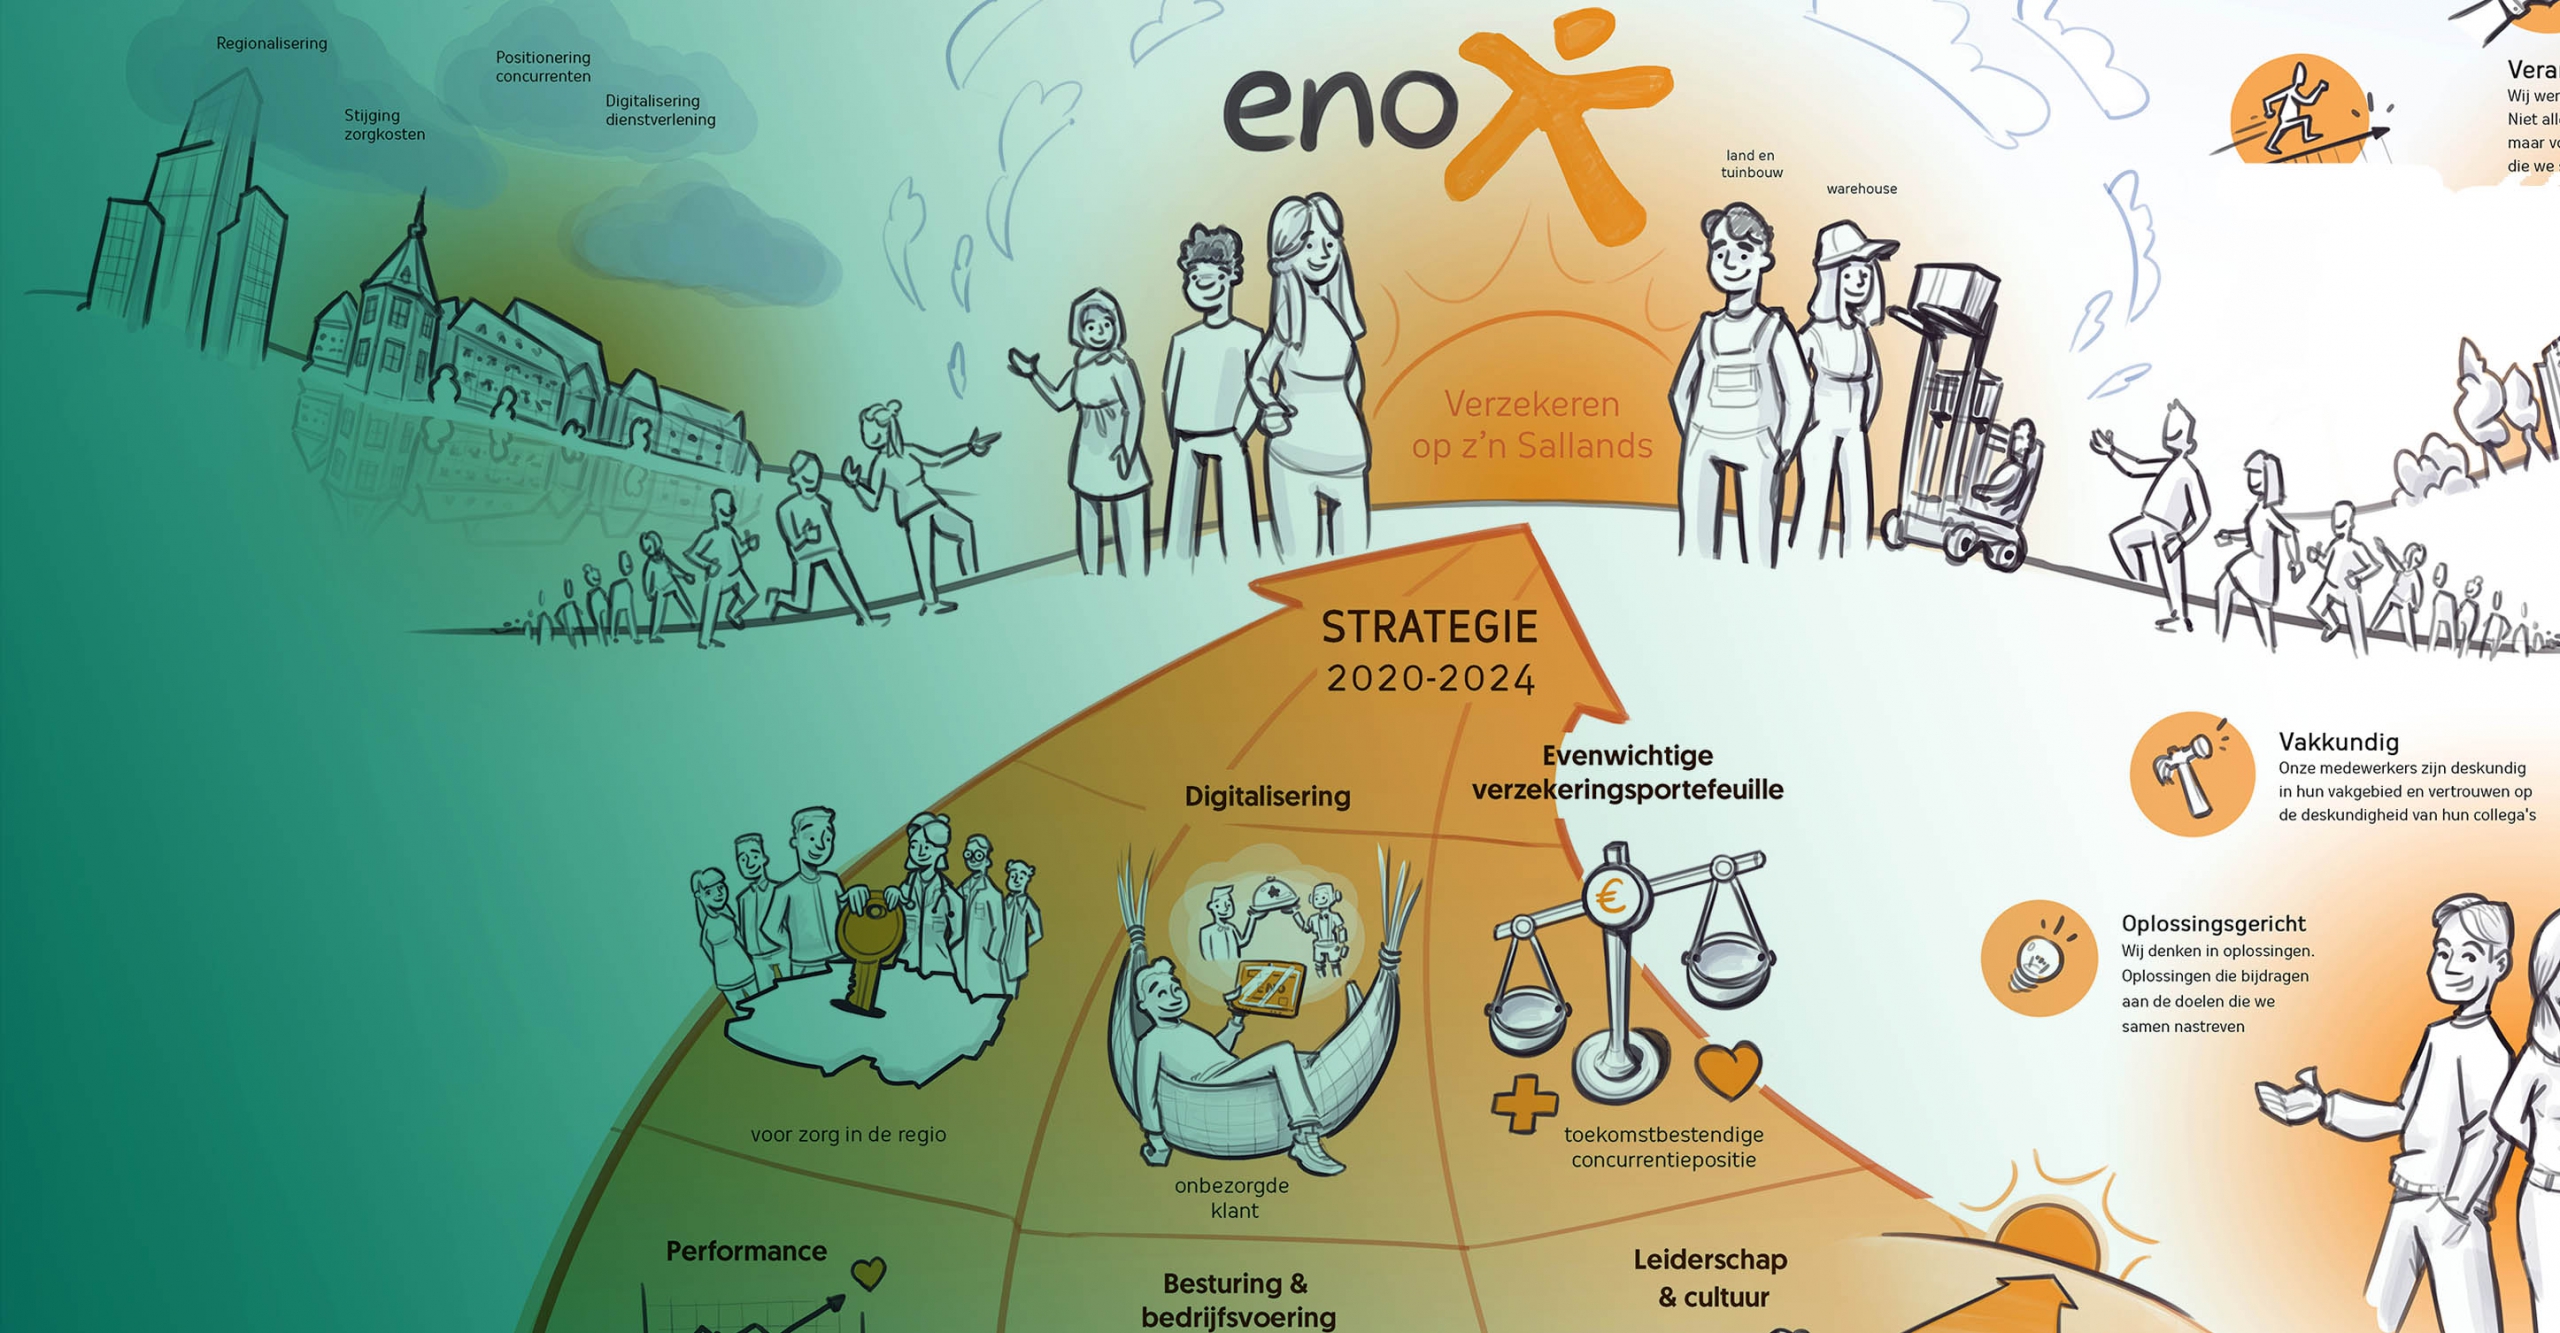 Eno health insurance - Strategy activation